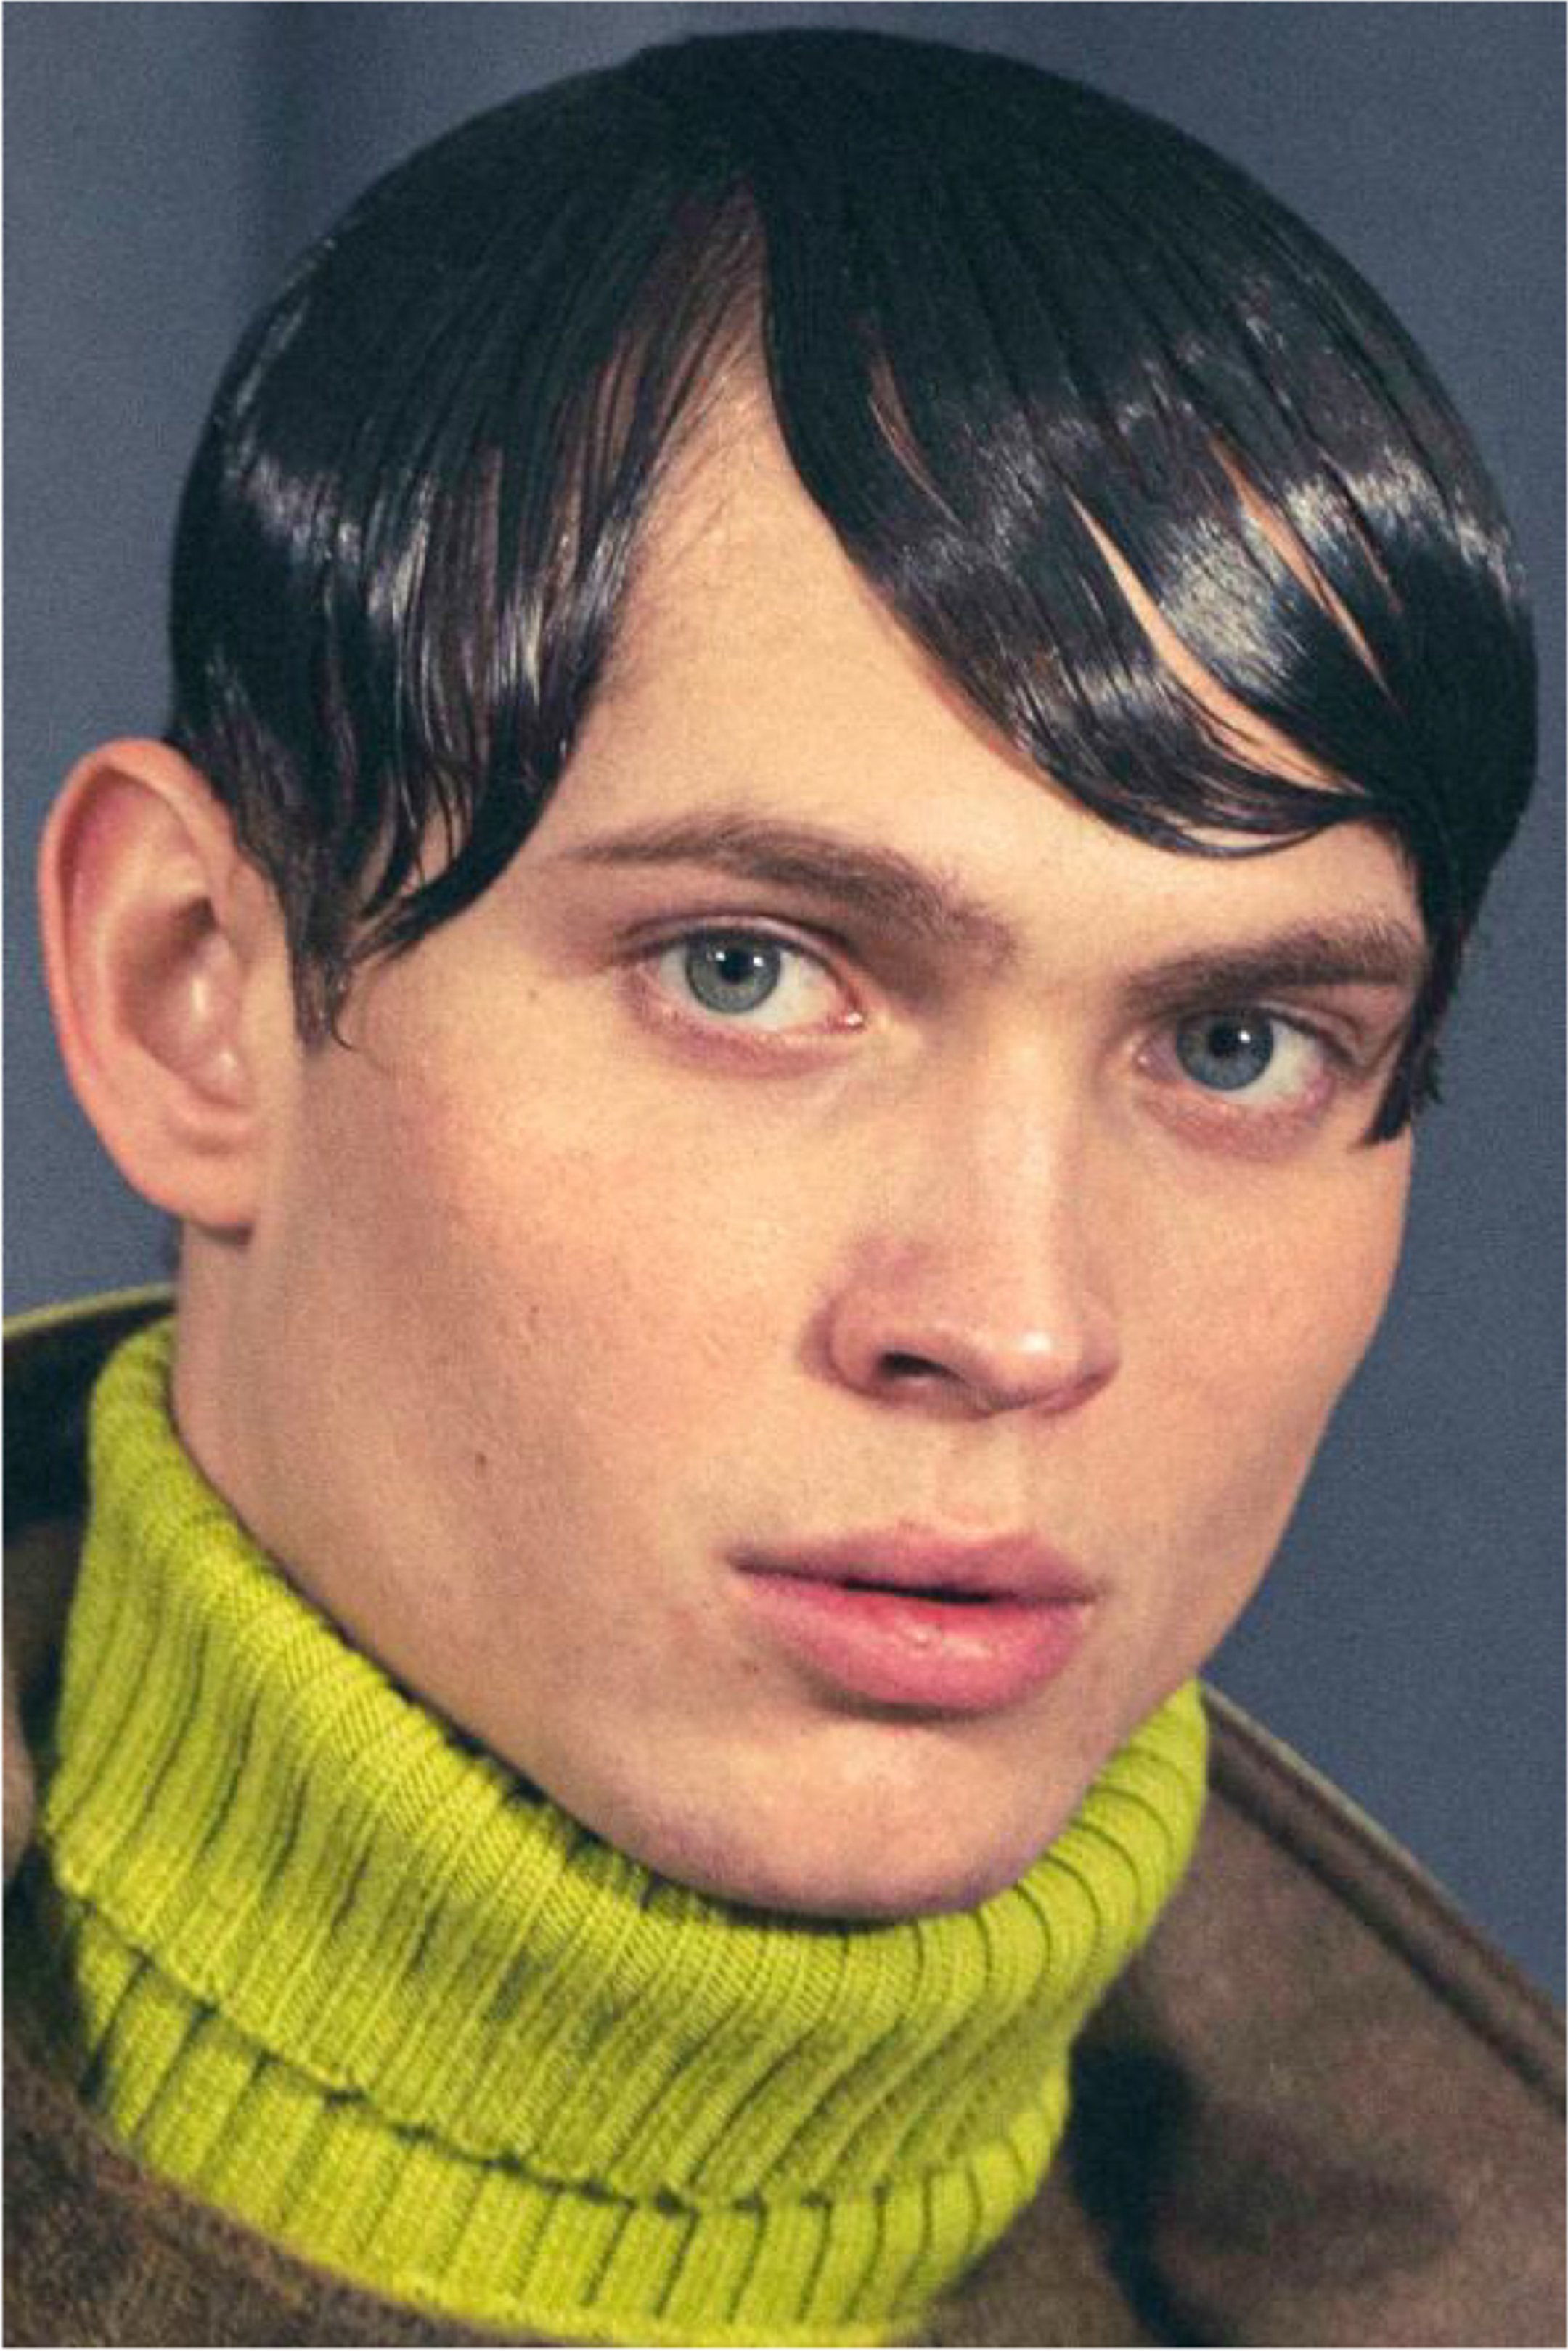 photograph of a young white man with slicked down black hair and green turtleneck